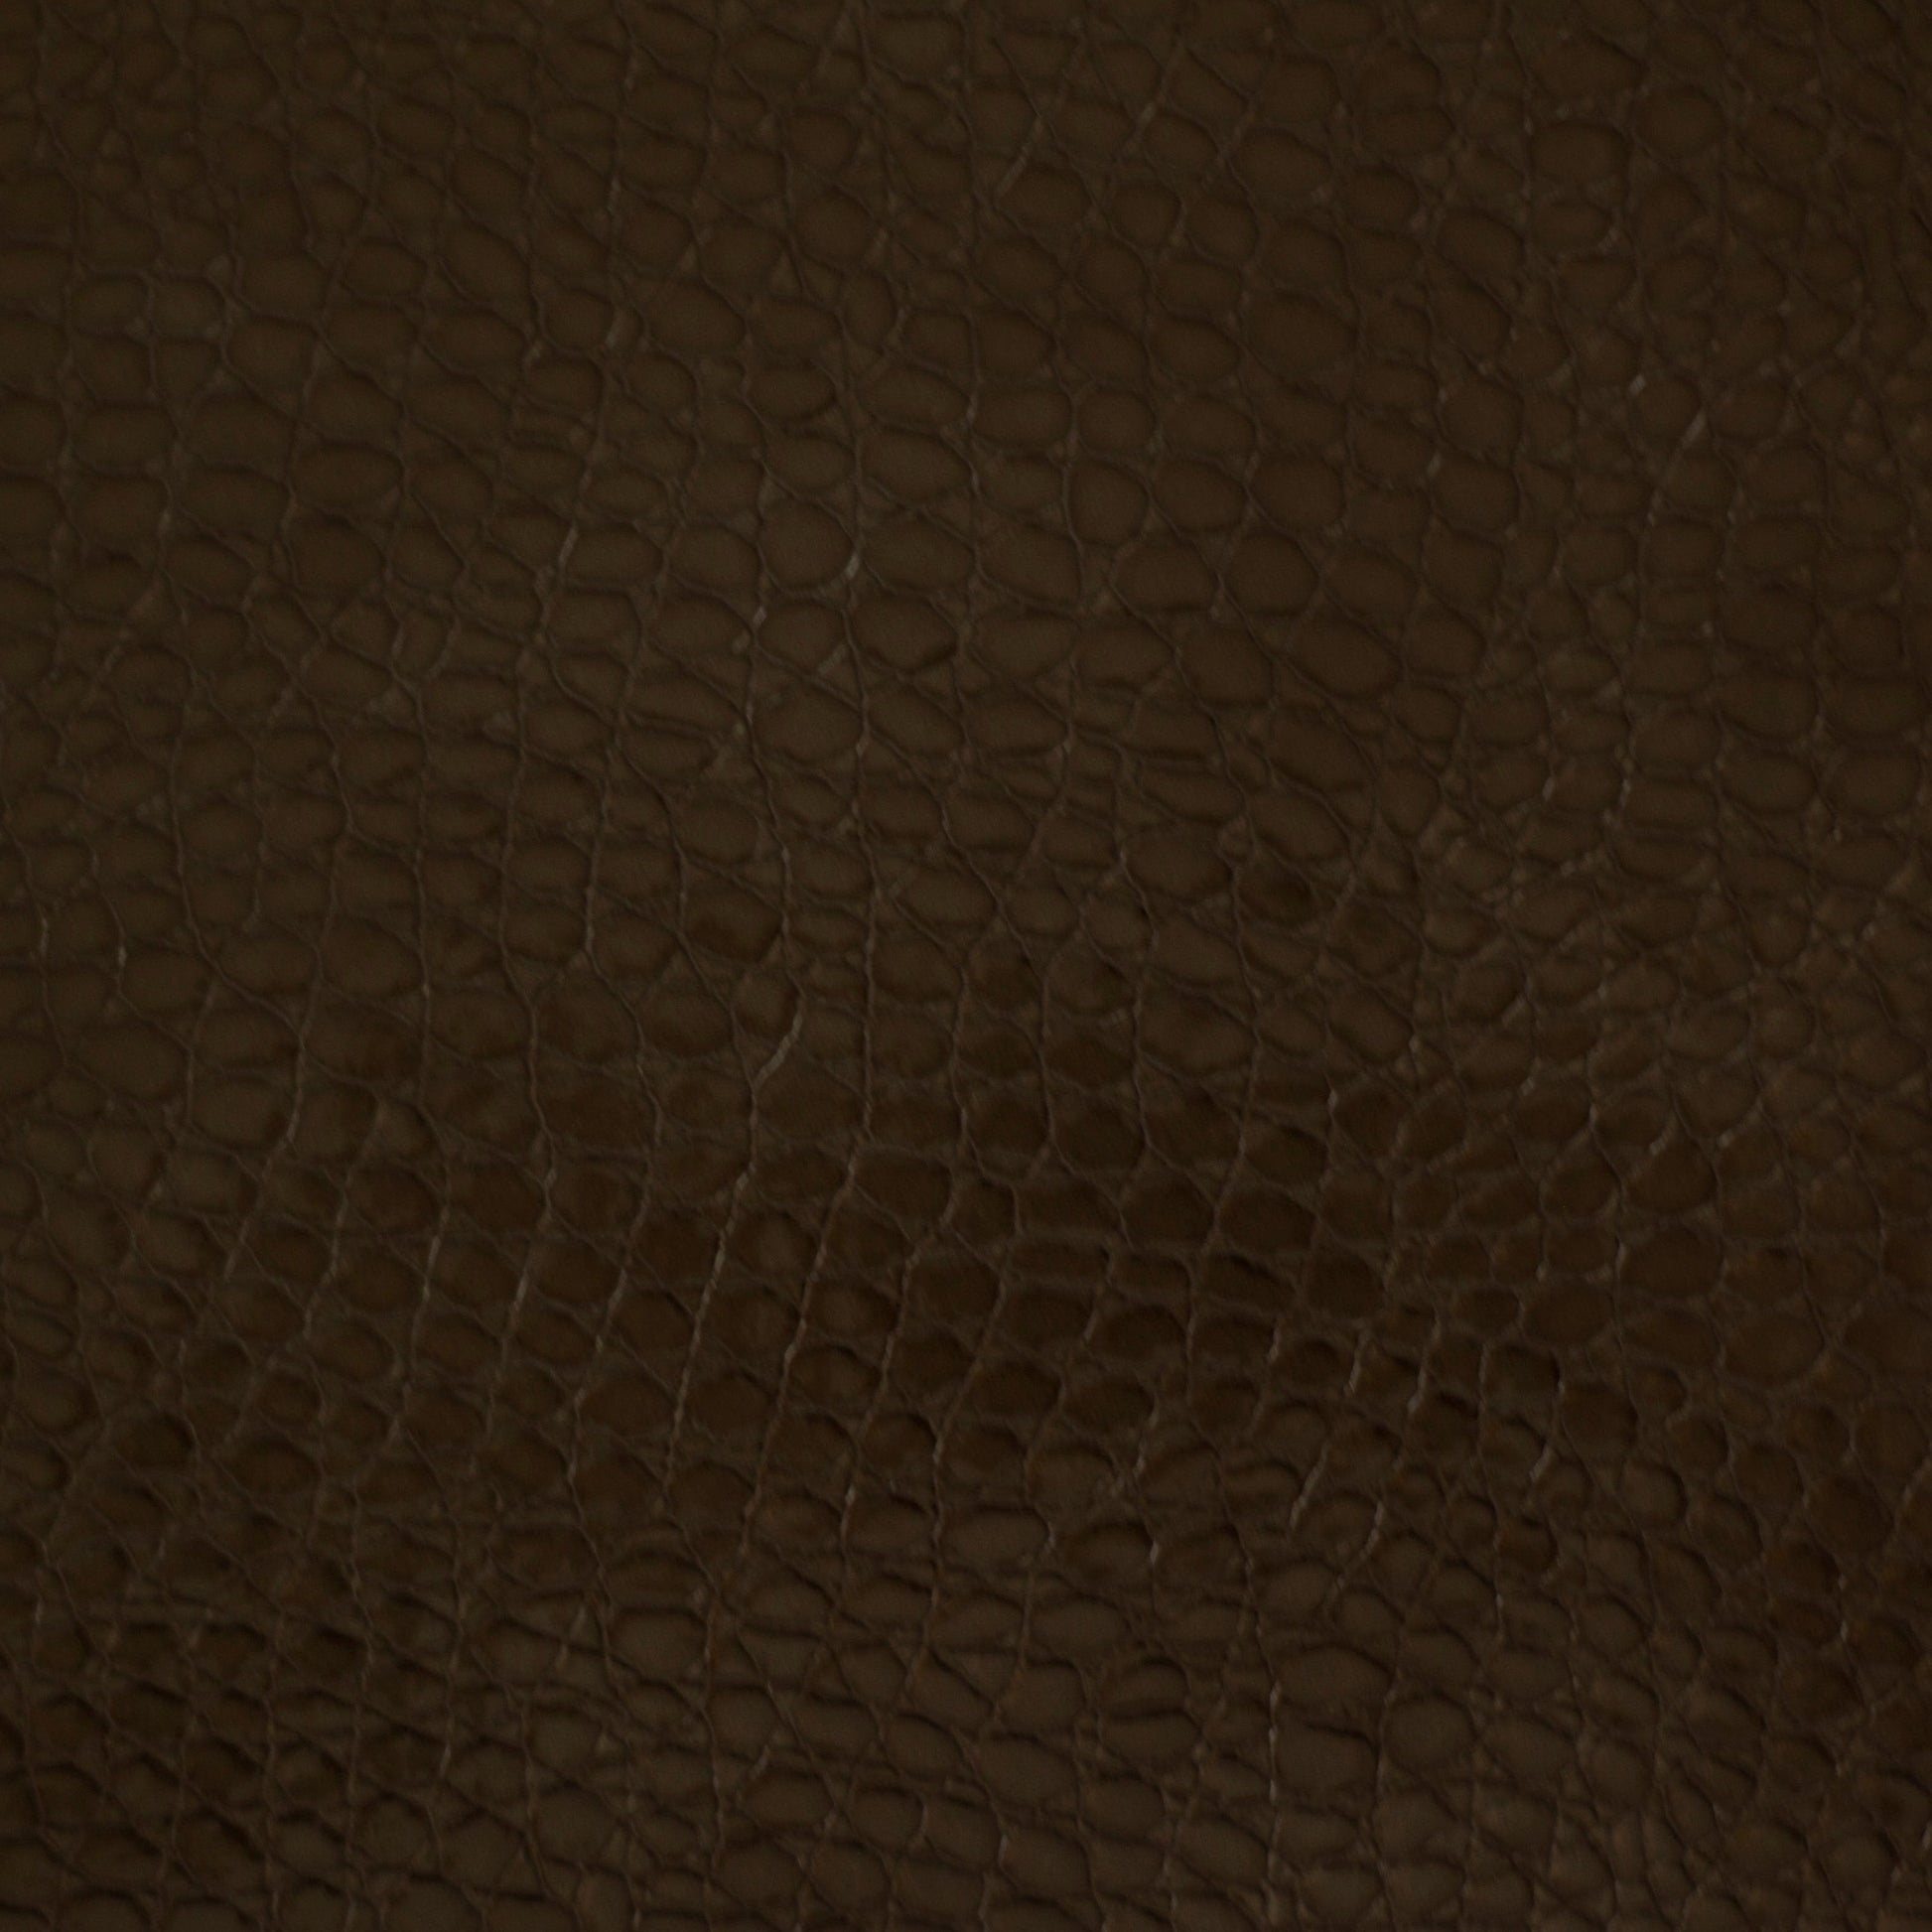 Cobble, Axin, Spilltop® Water Resistance, Hospitality Leather Hide